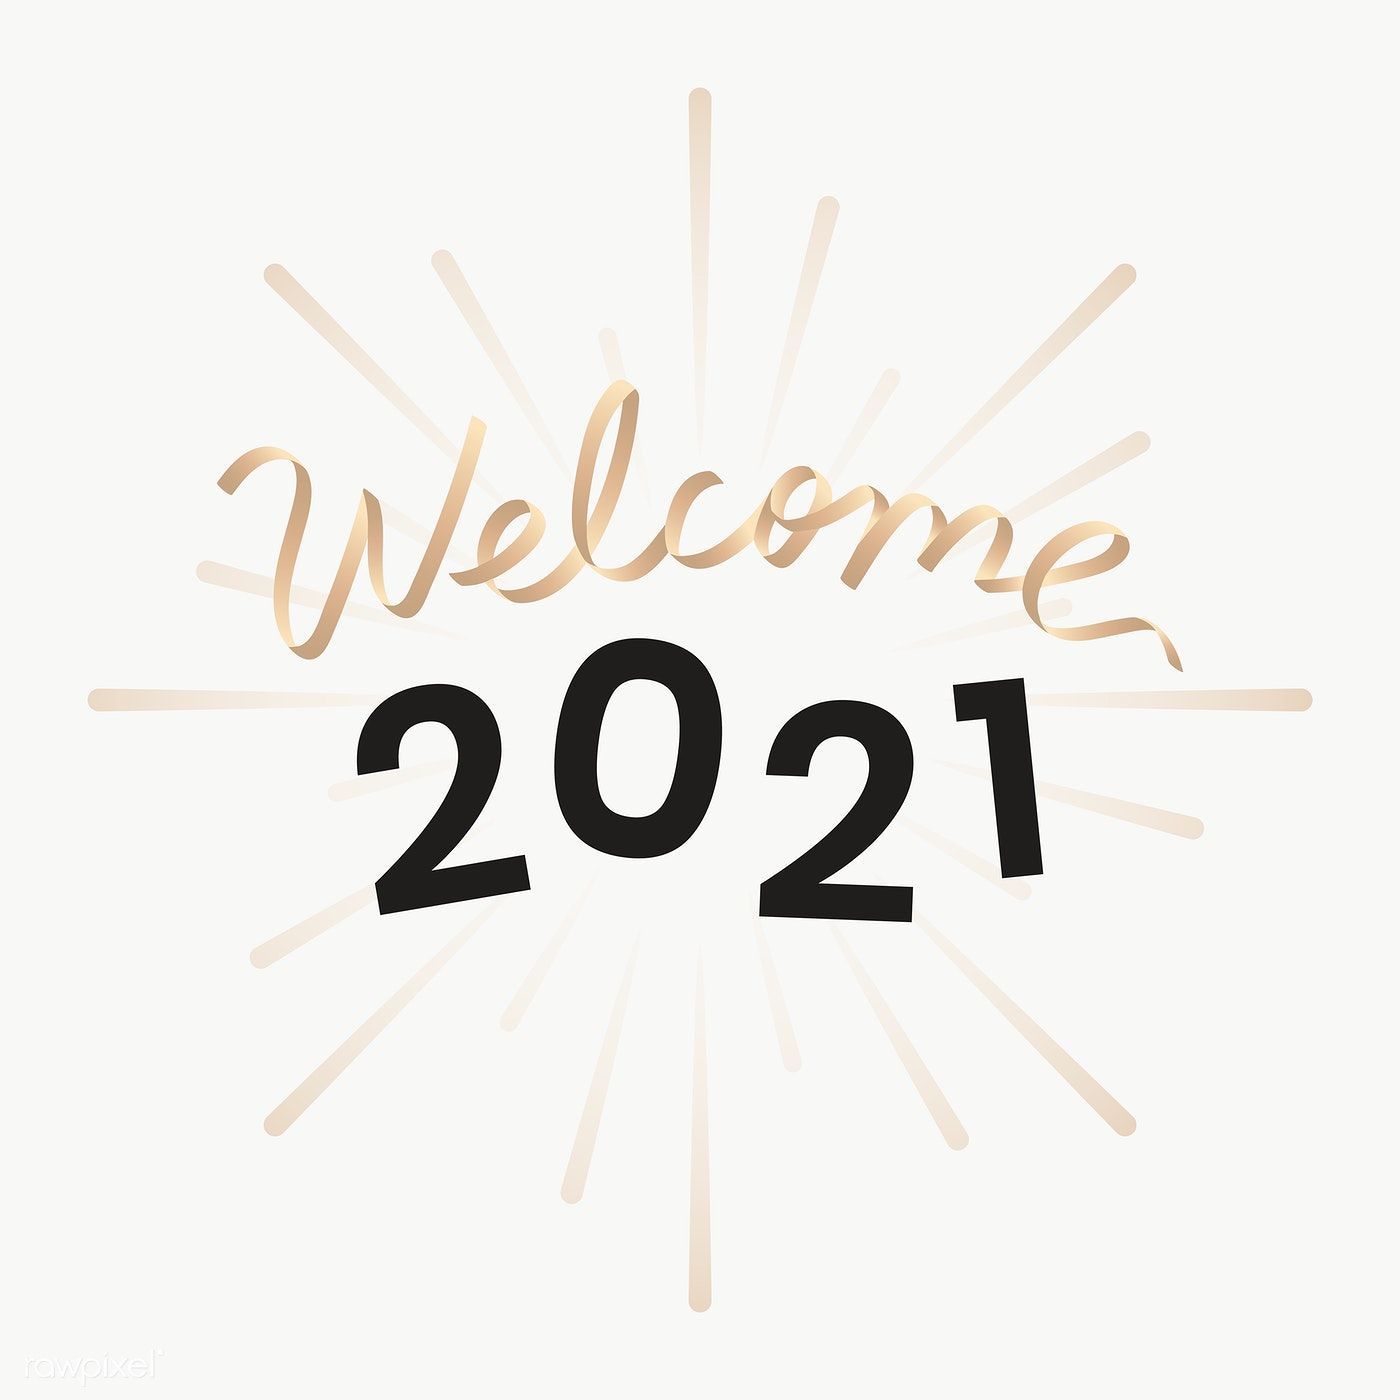 Golden welcome 2021 transparent png. free image / NingZk V. Happy new year image, Happy new year fireworks, Happy new year wishes